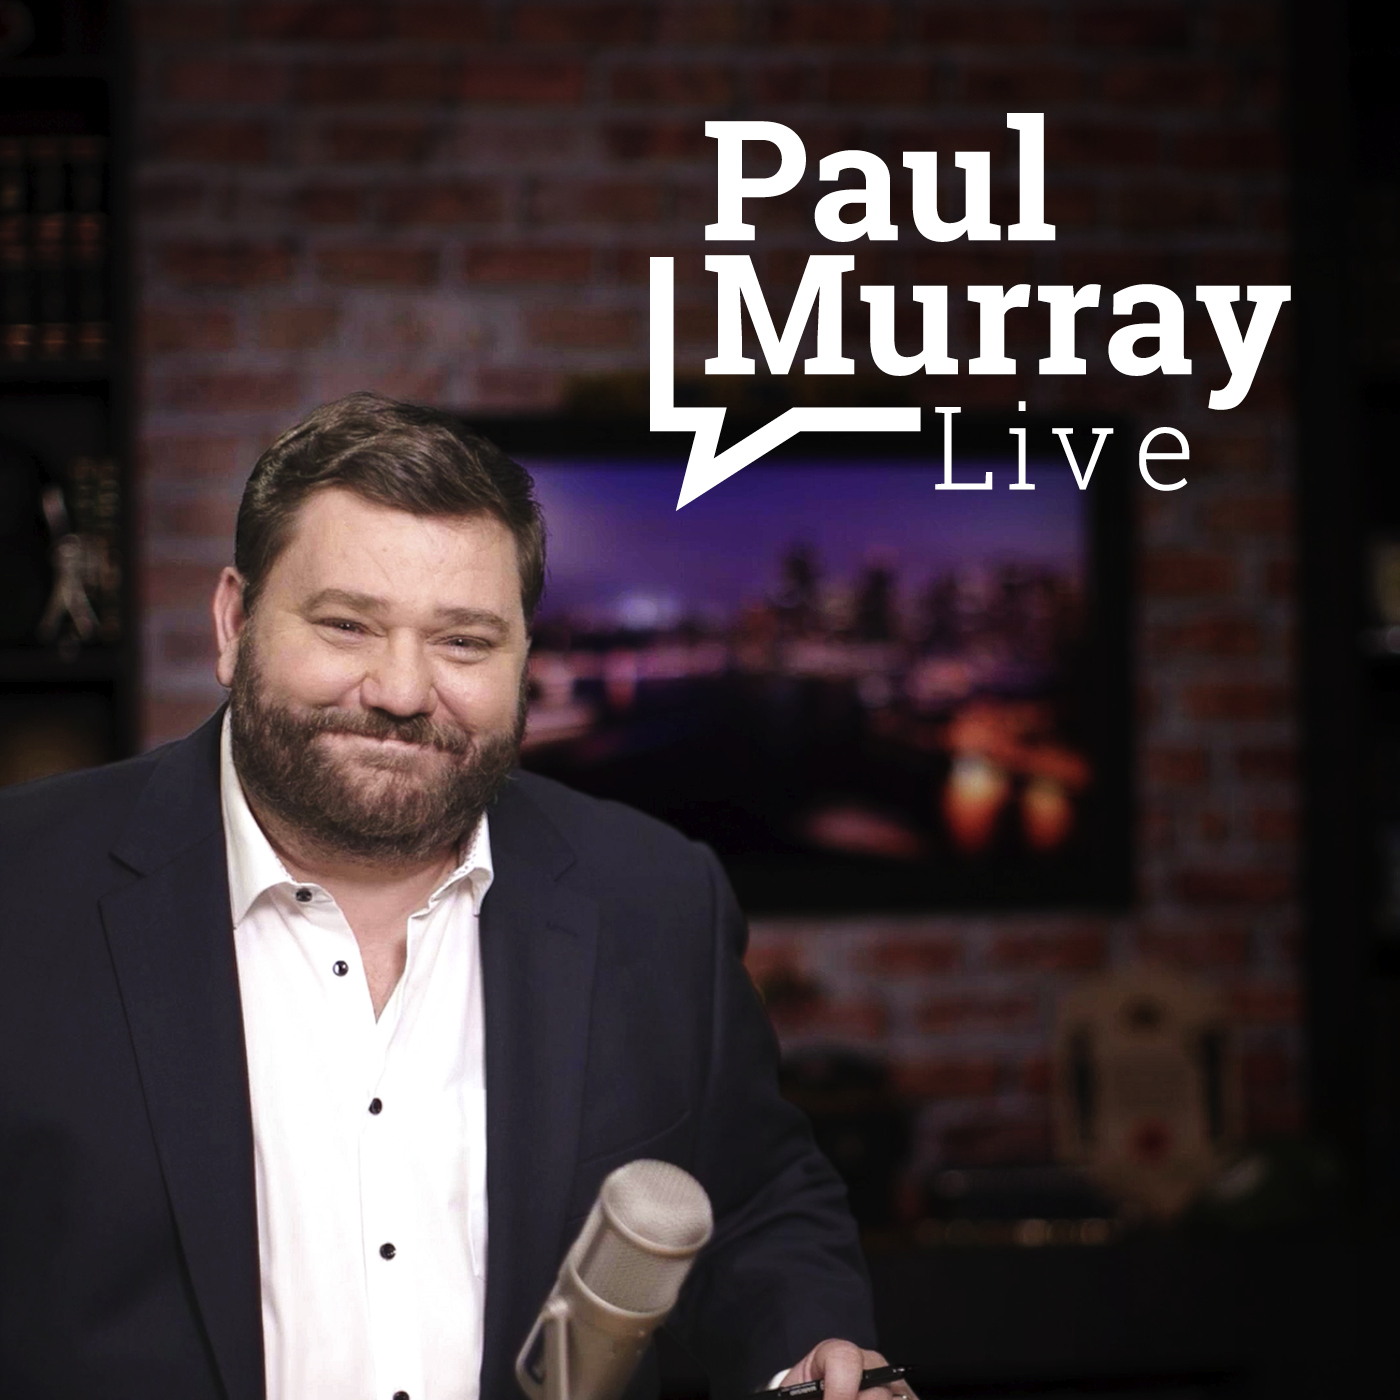 Paul Murray Live, Tuesday 14 March